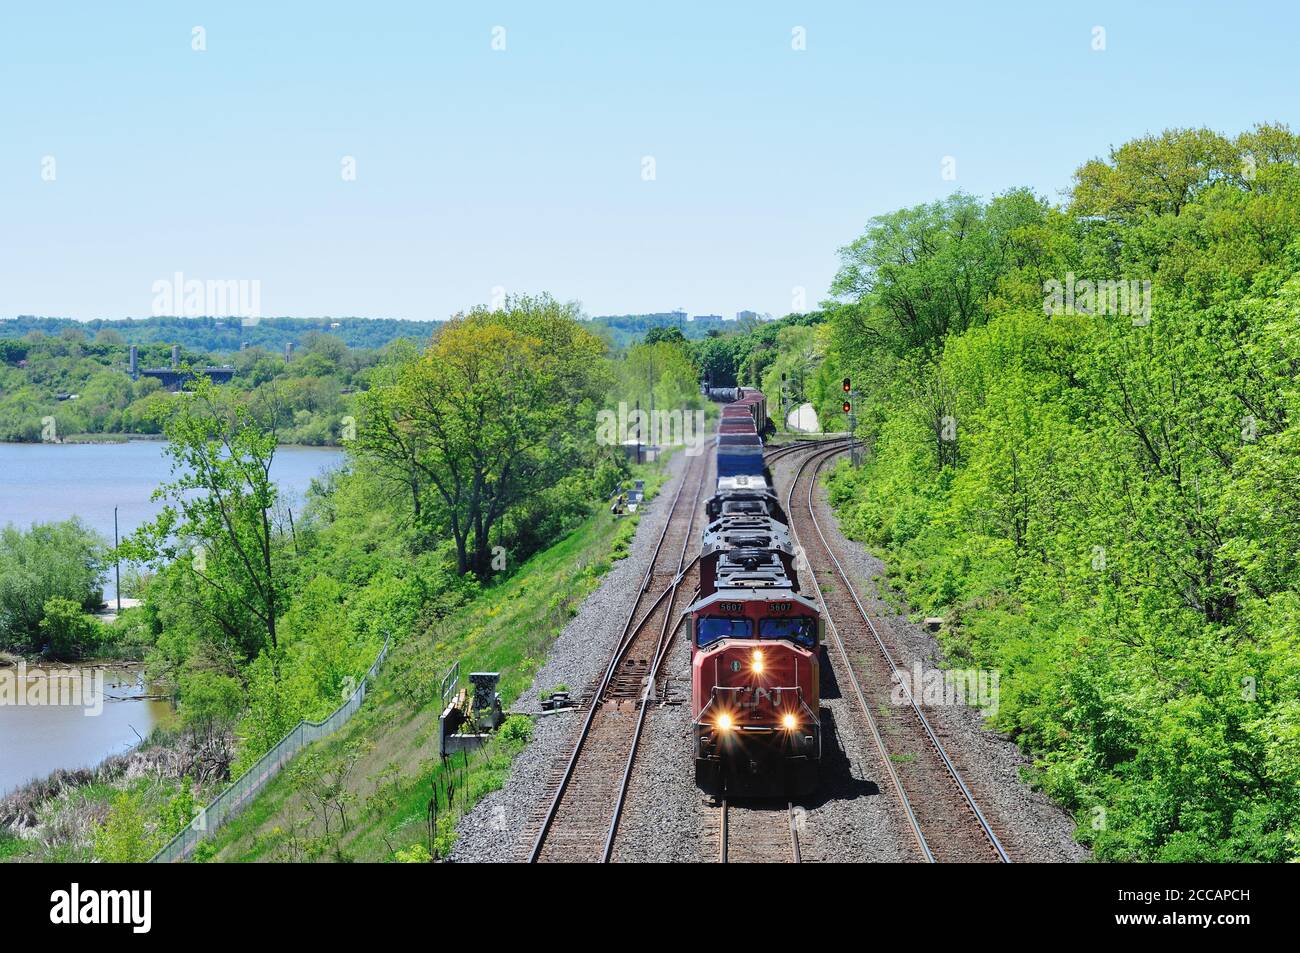 Oncoming CN freight train with lit headlights carrying containers, tanker cars and cargoes passing through Hamilton, Ontario, Canada during daytime Stock Photo